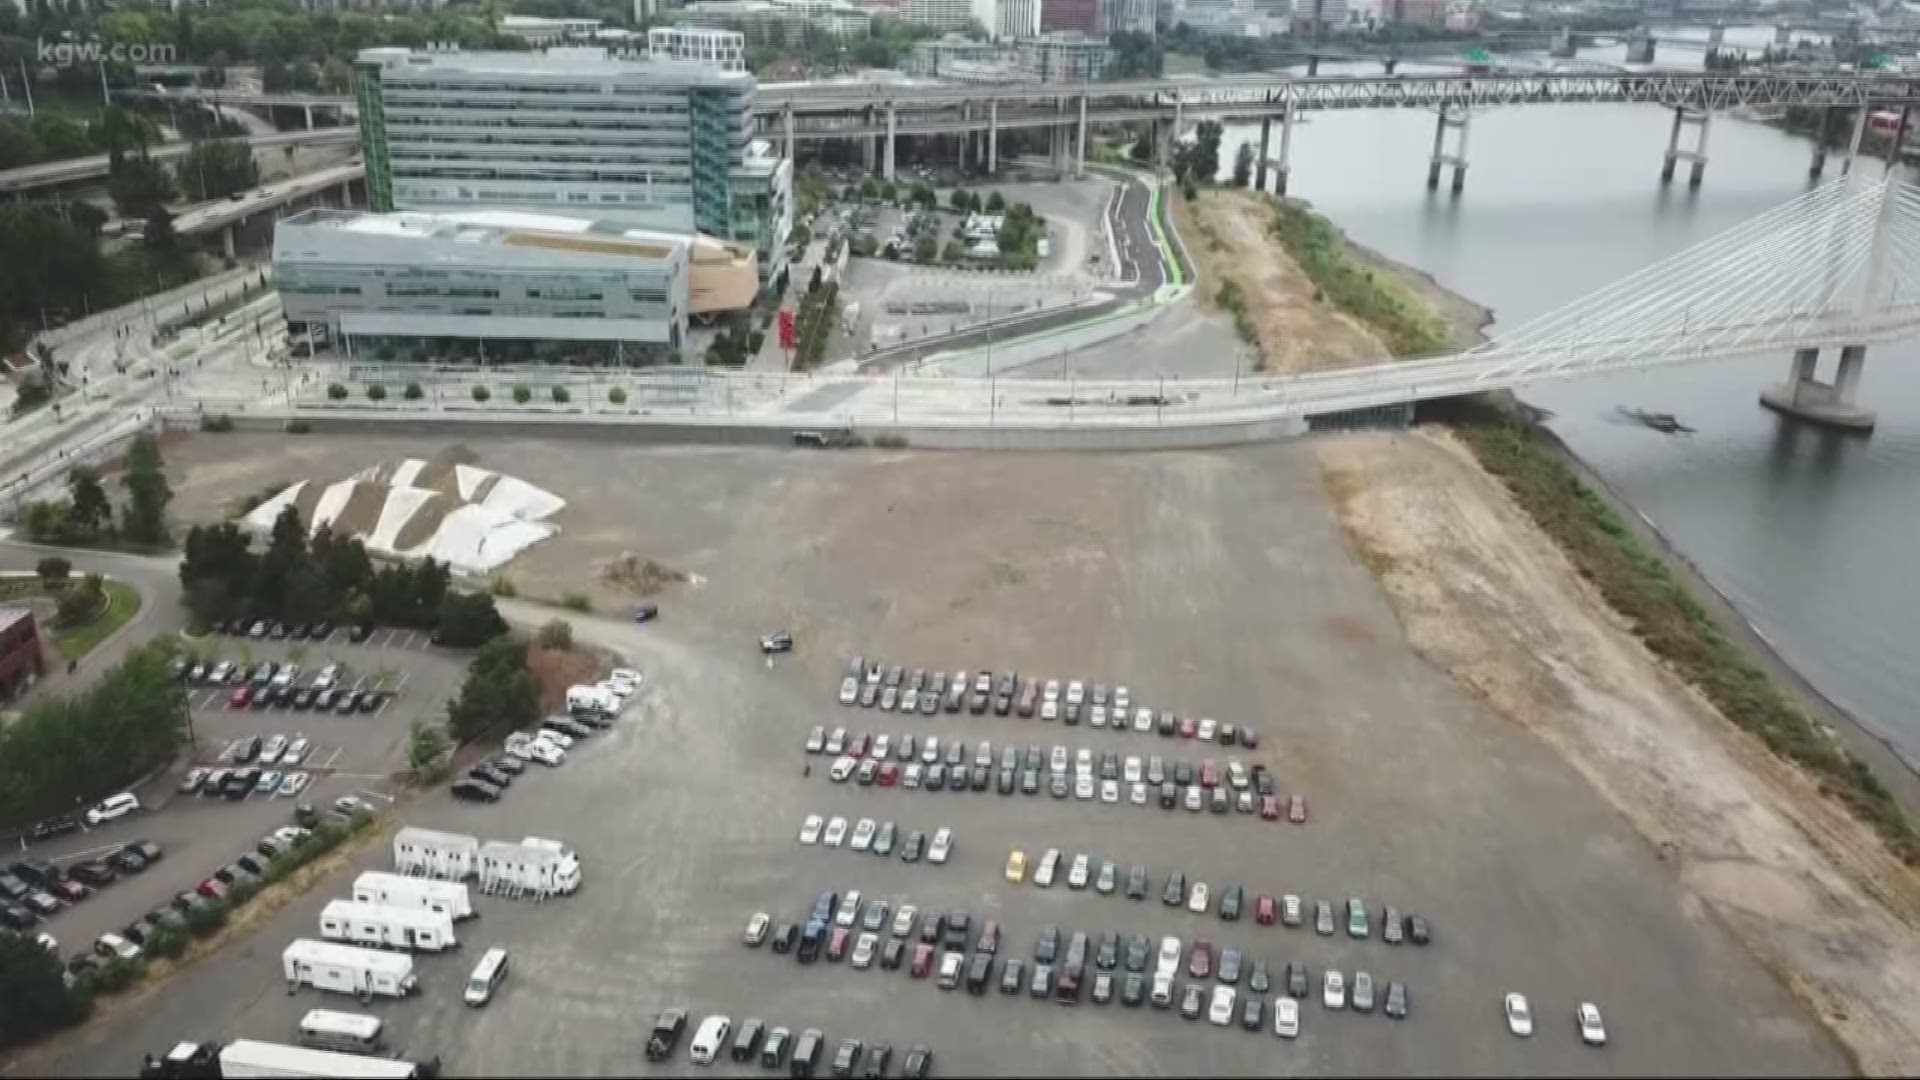 Could you imagine a 10,000-seat amphitheater on Portland’s South Waterfront? Well, it could happen. National entertainment company Live Nation is eyeing one of the last undeveloped plots in that area for an outdoor venue. KGW’s Morgan Romero has a look at the proposal.